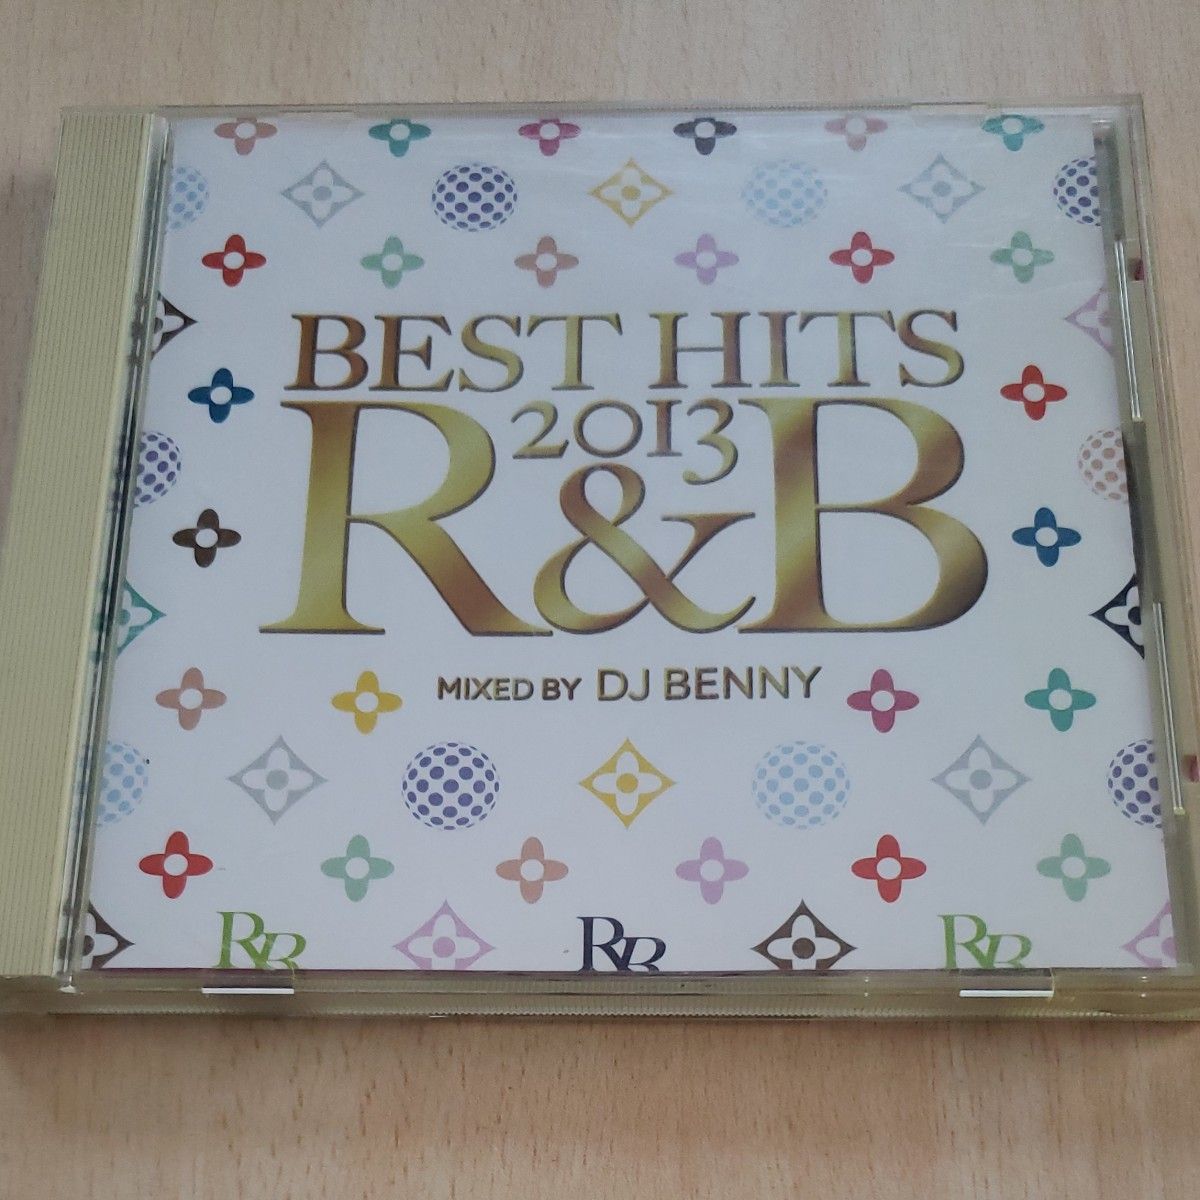 BEST HITS 2013 R&B　MIXED BY  DJ AENNY